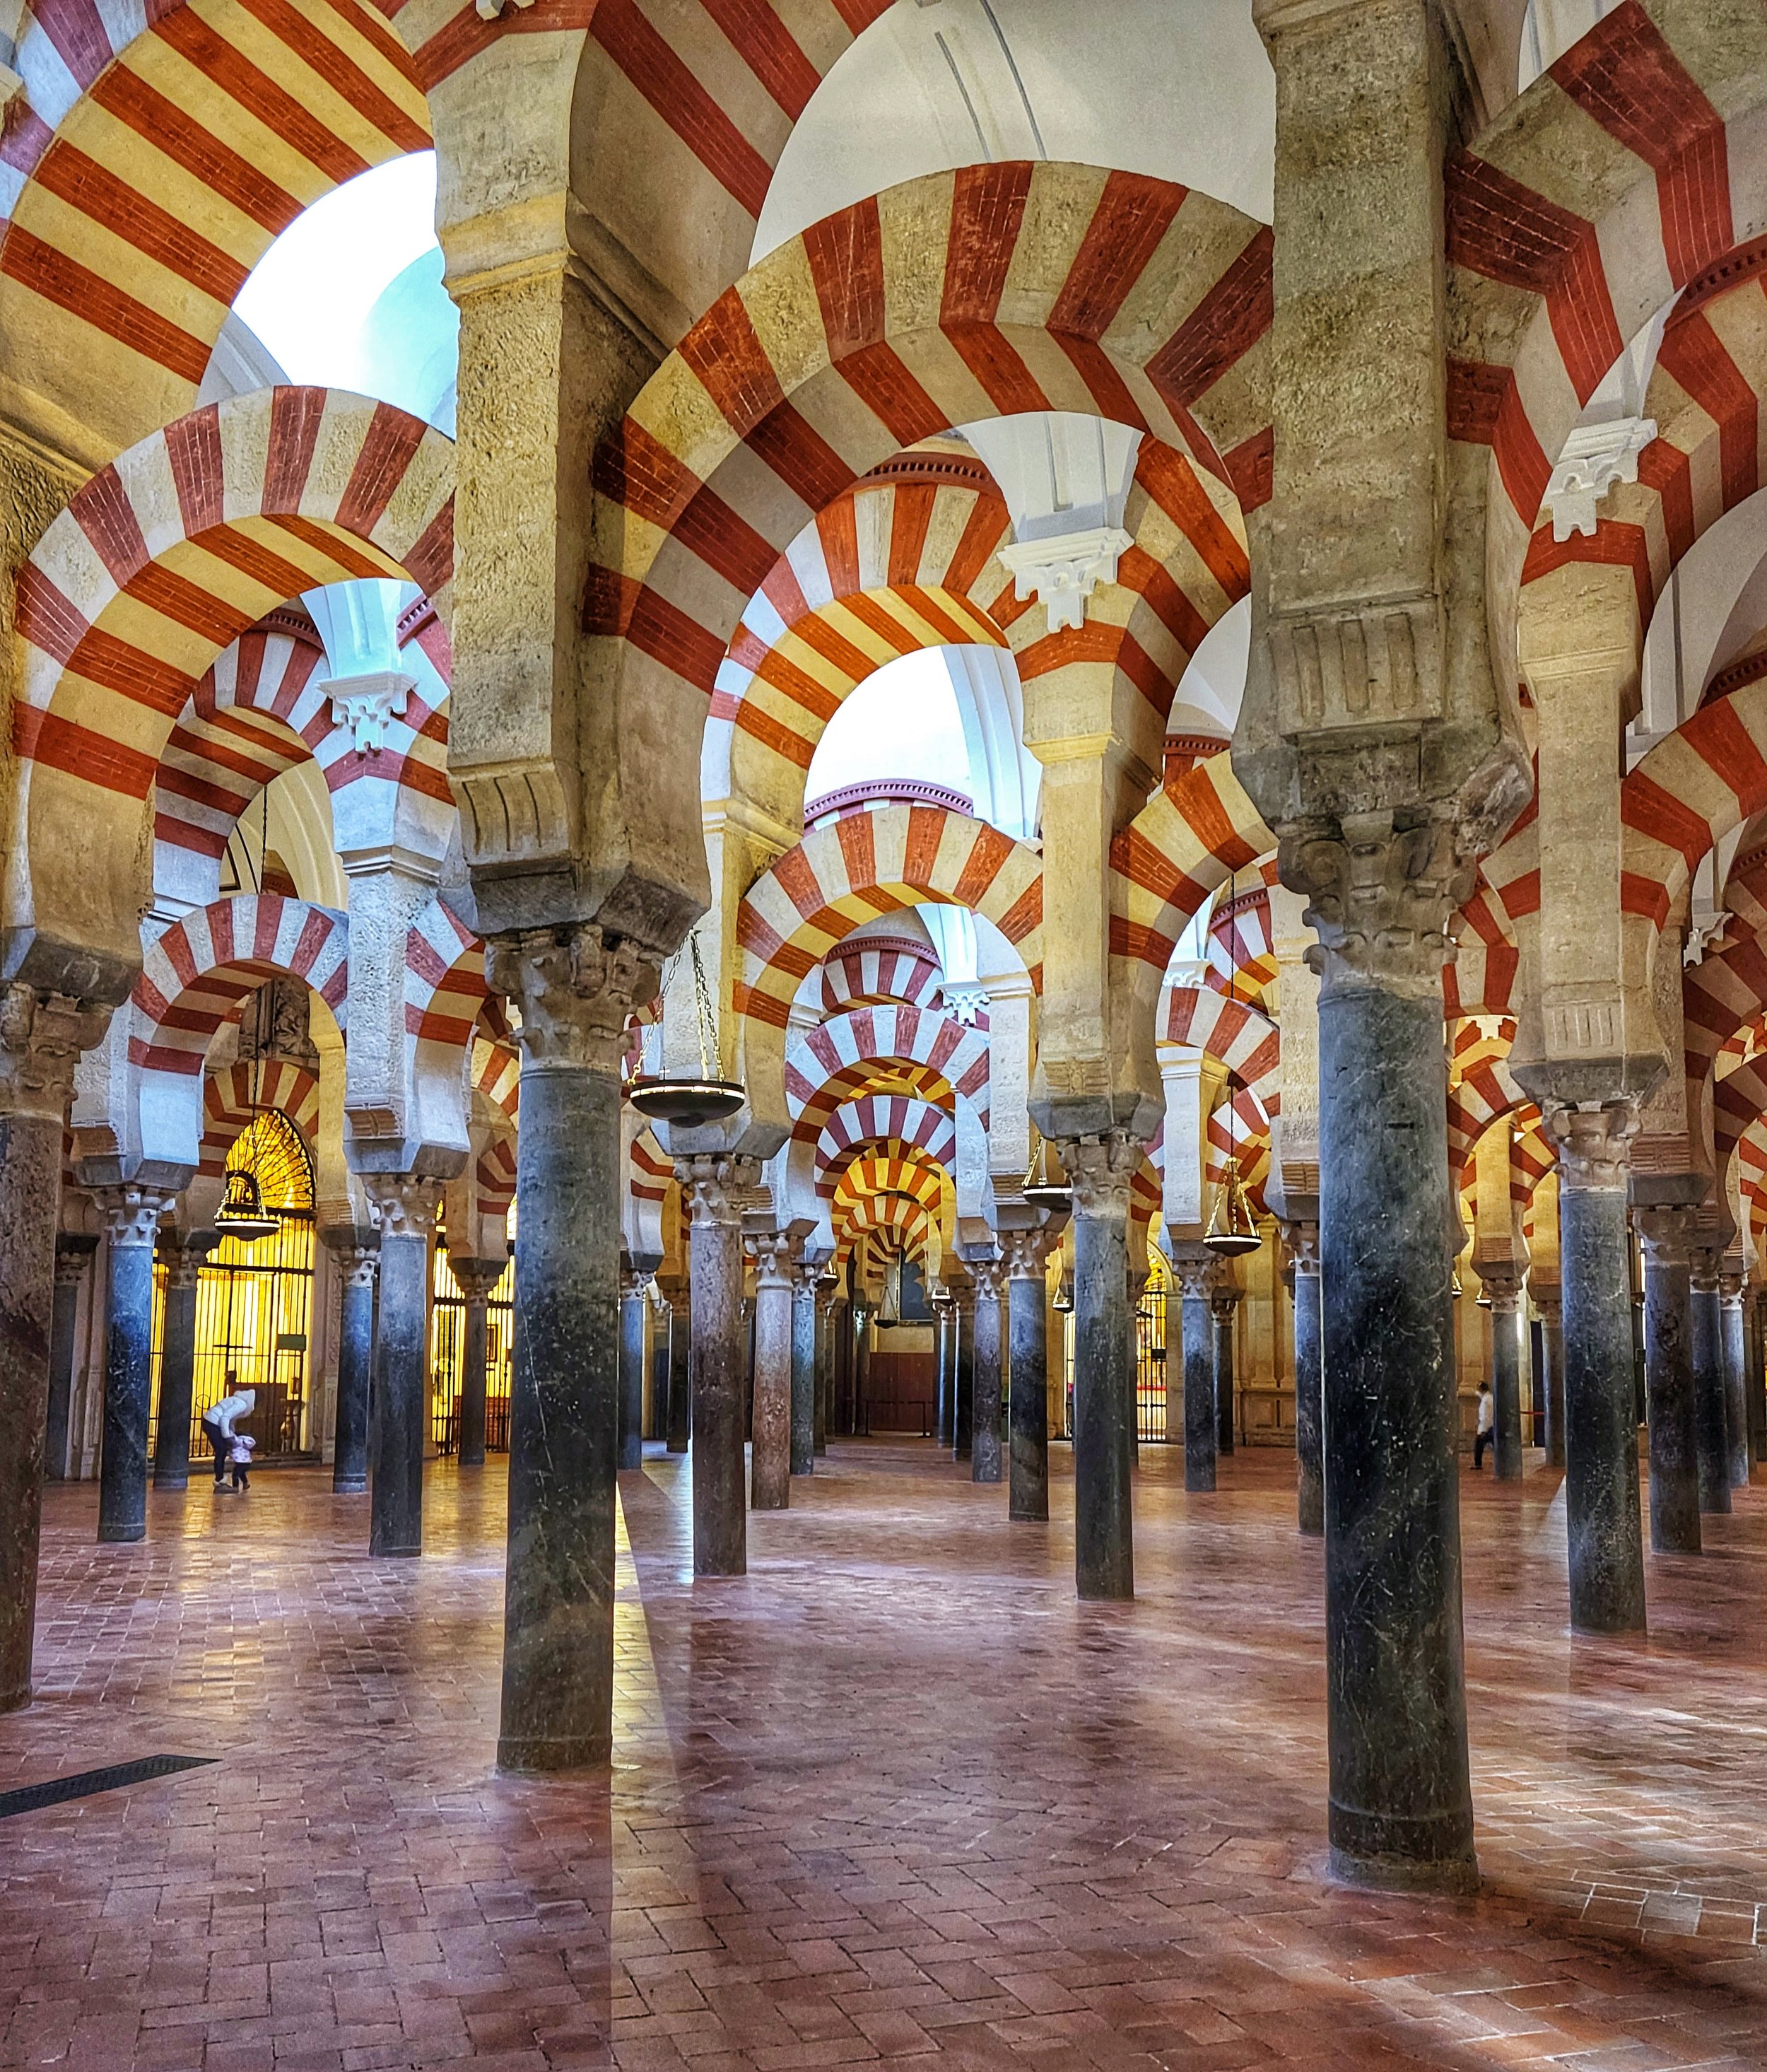 Arches in the Mosque Cathedral - Cordoba, Spain